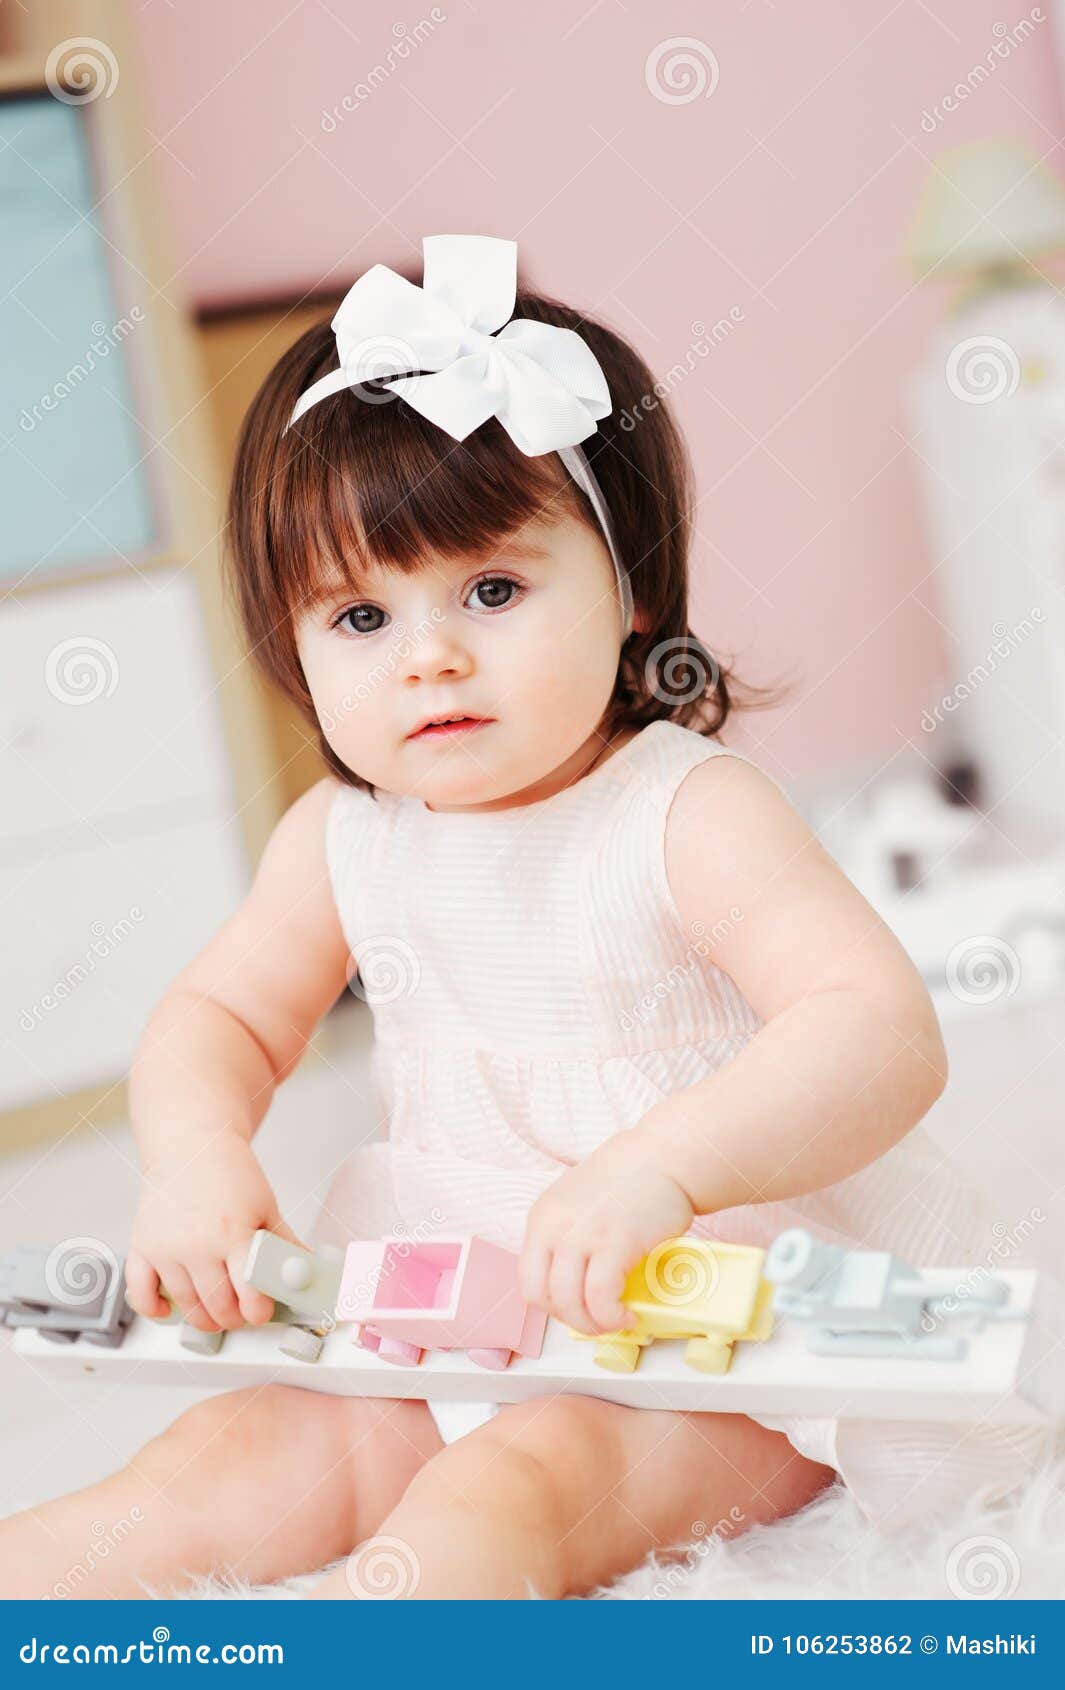 Cute Happy 1 Year Old Baby Girl Playing with Wooden Toys at Home ...